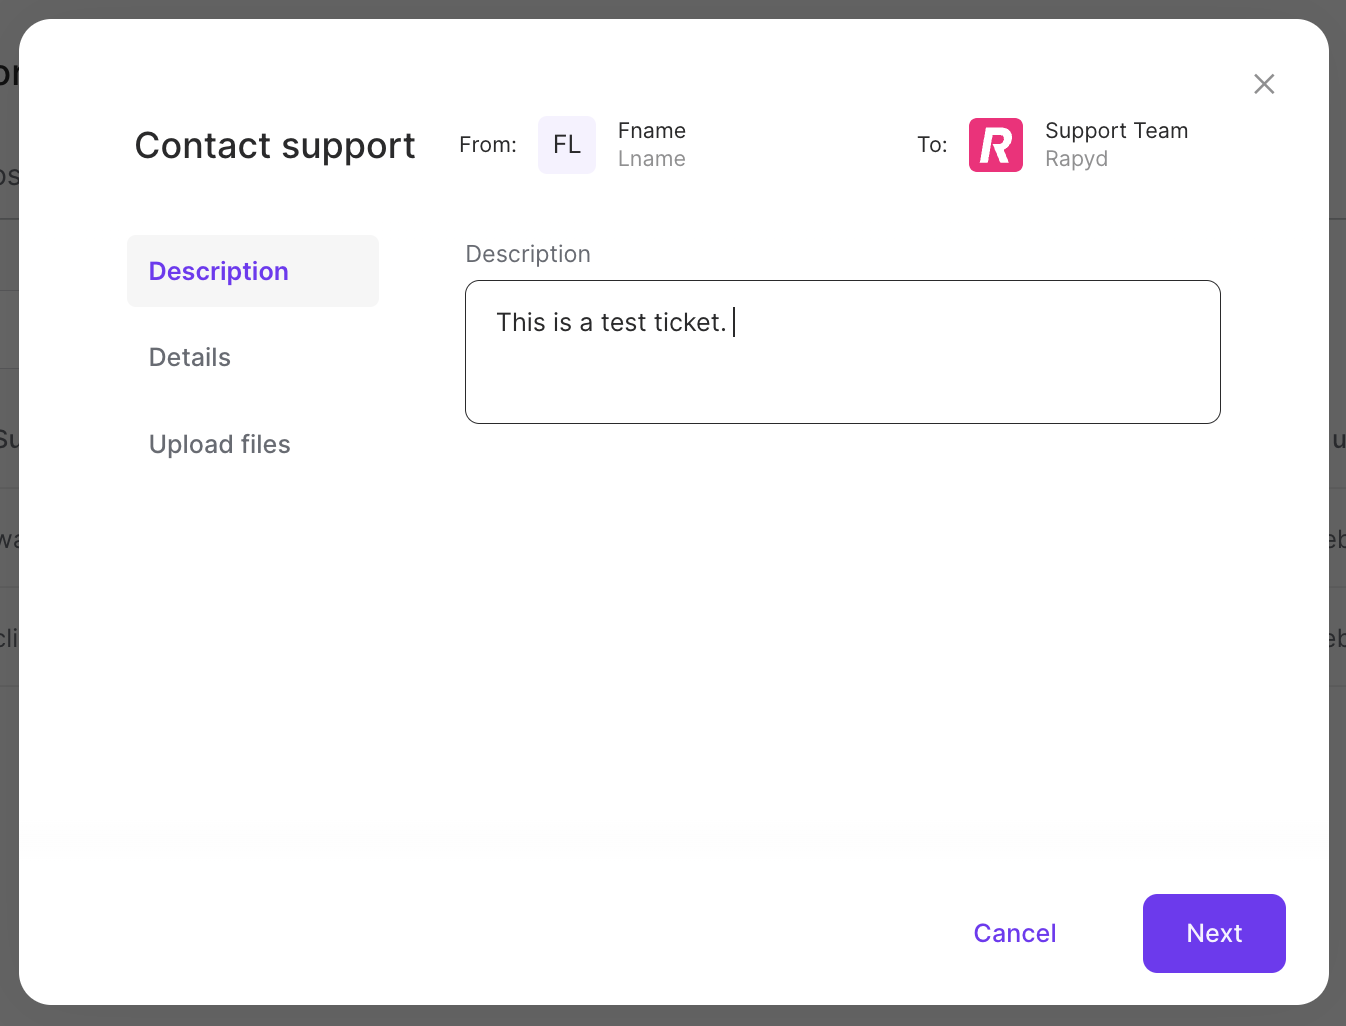 creating-support-ticket-flow-4.png